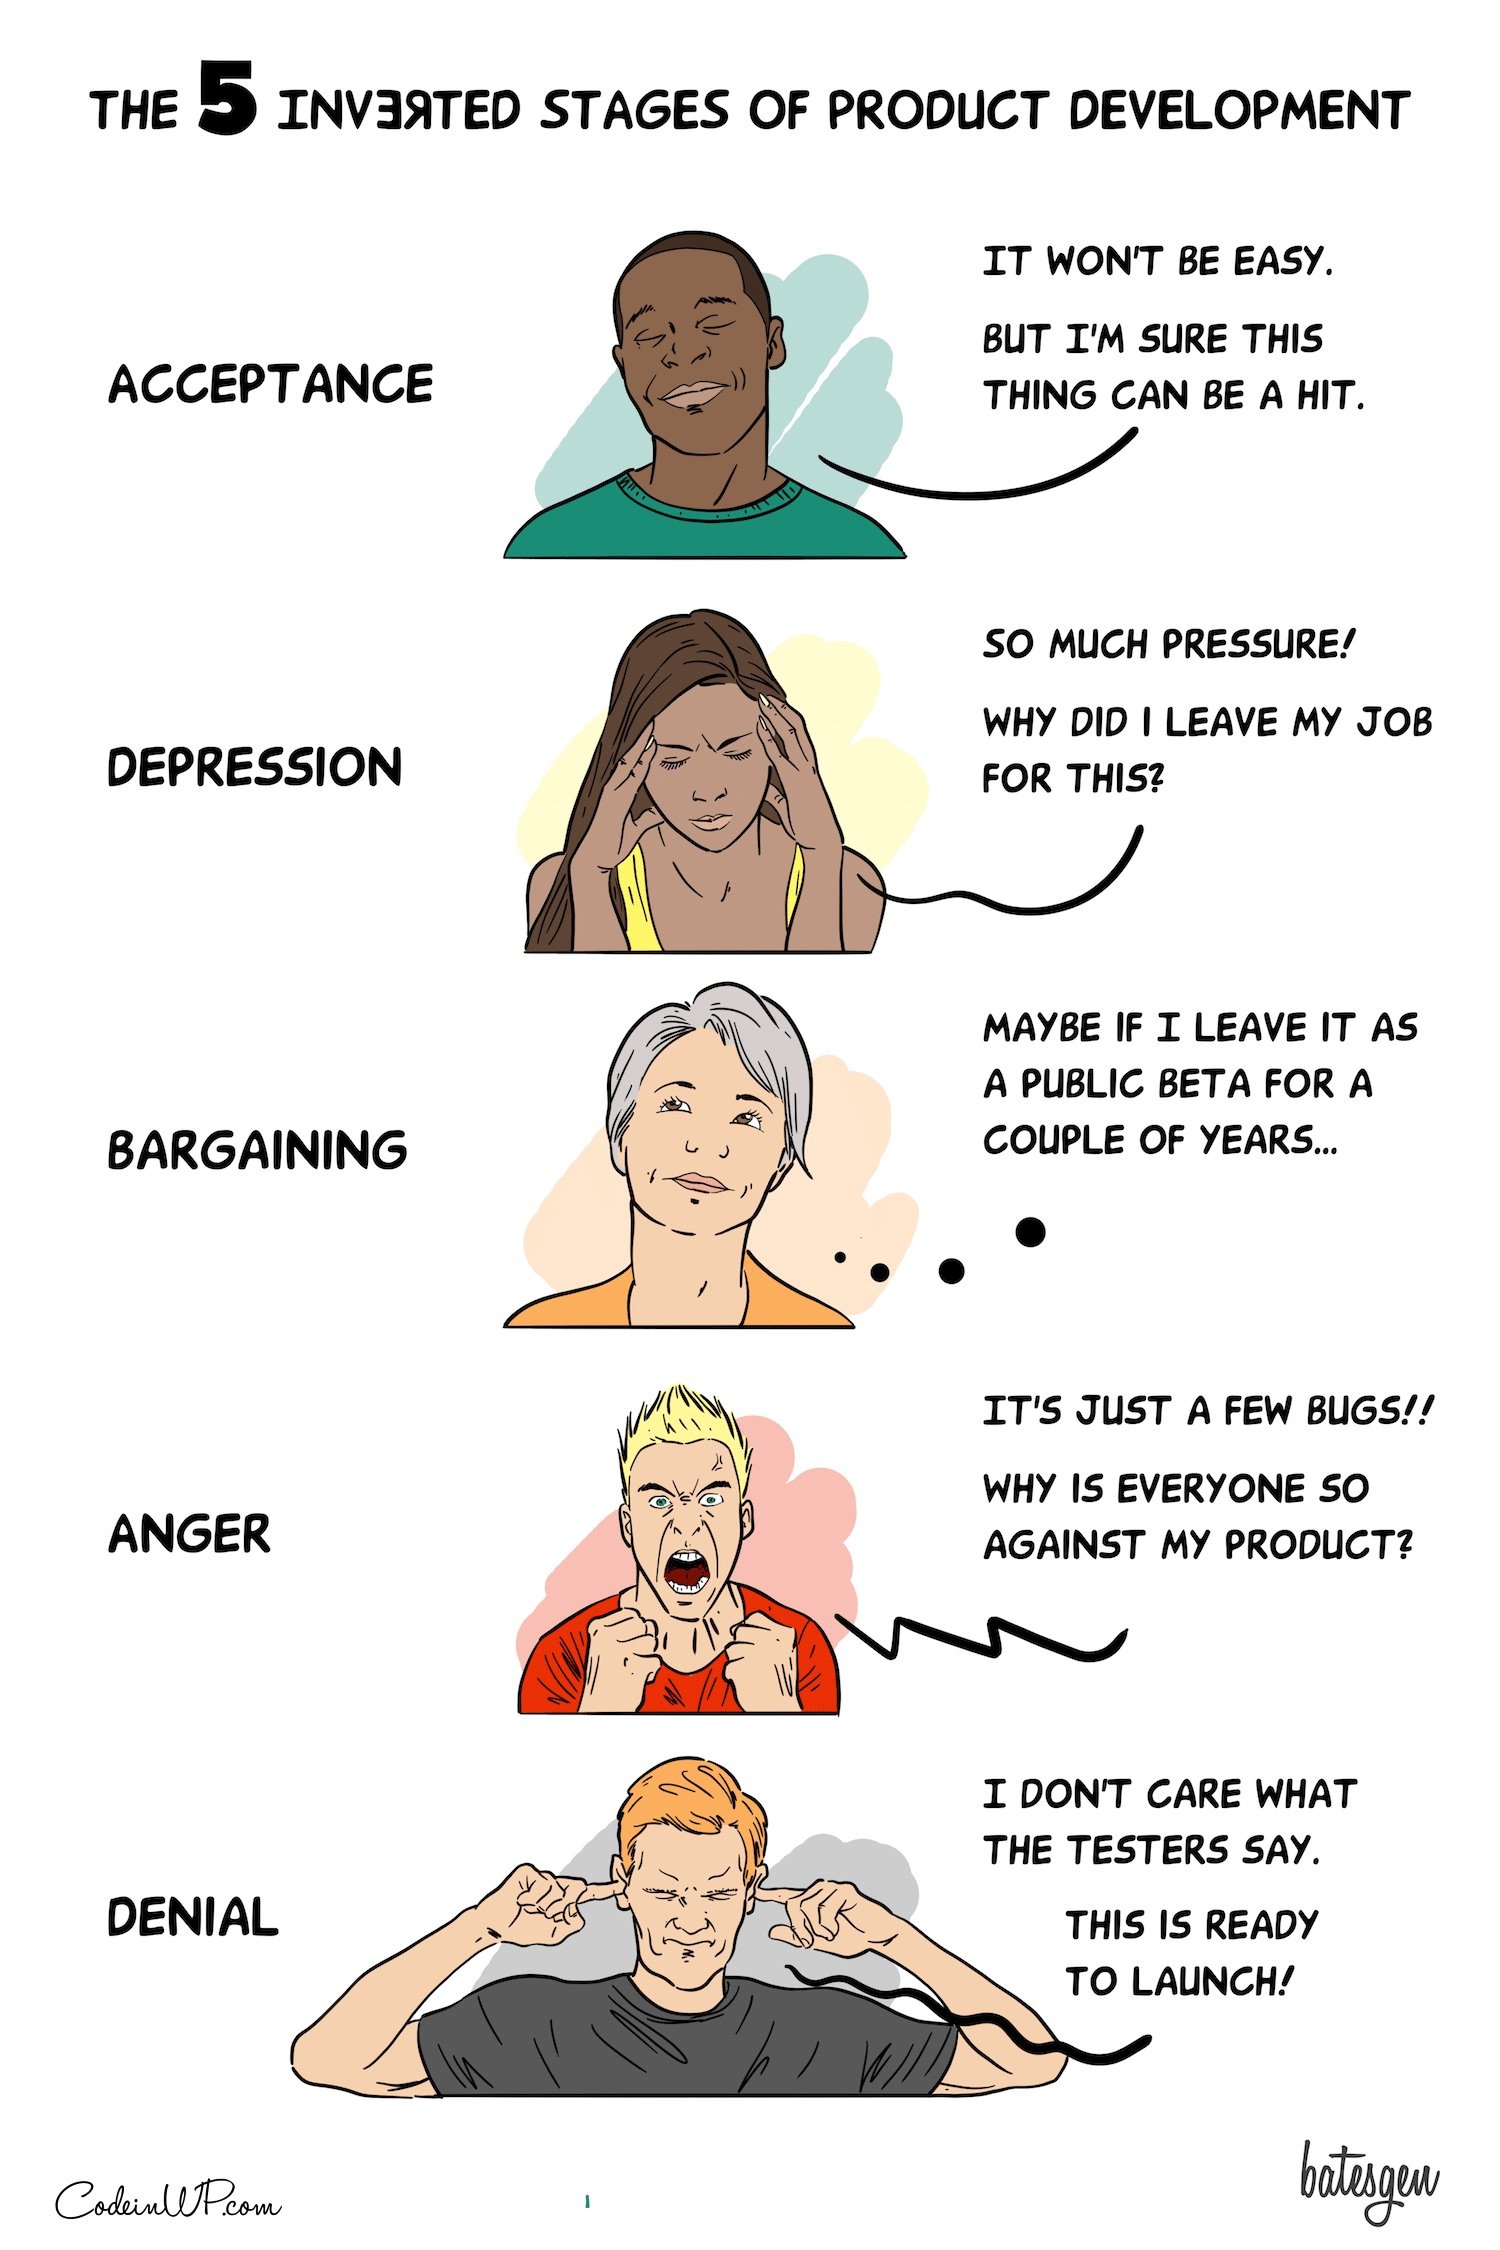 The five stages of grief reimagined as the stages of product development